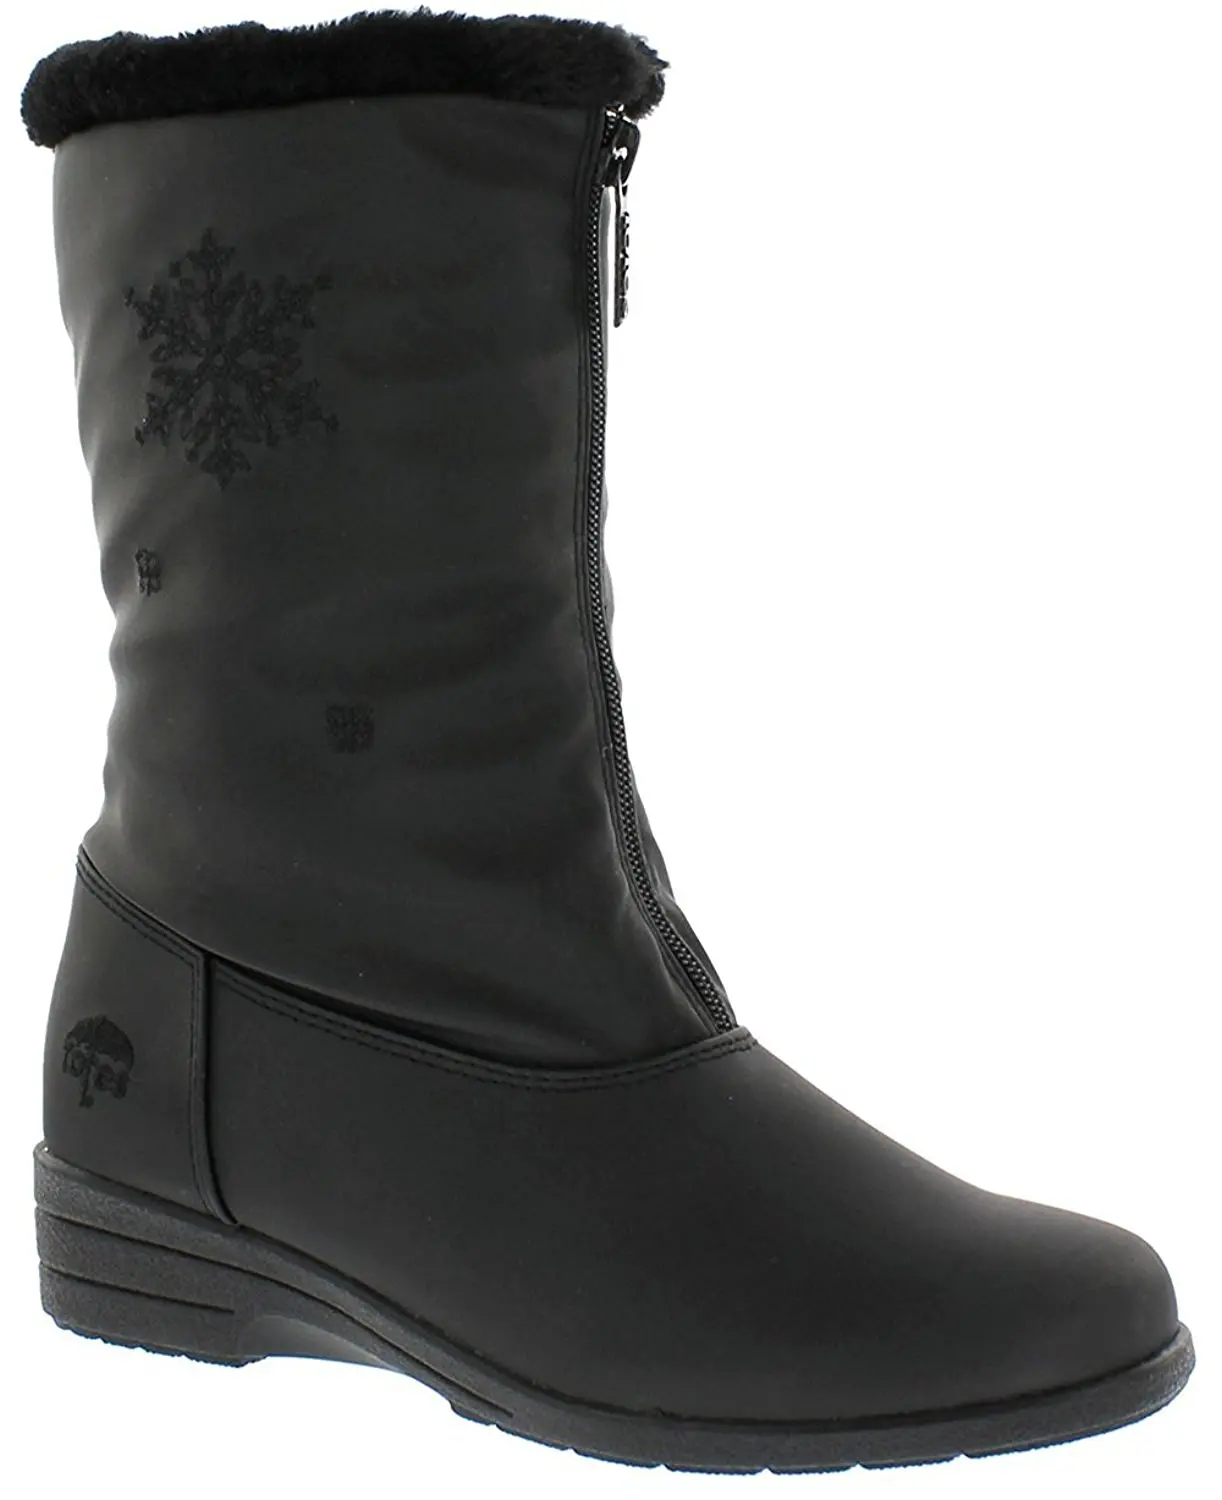 chromatics by totes snowflake boots